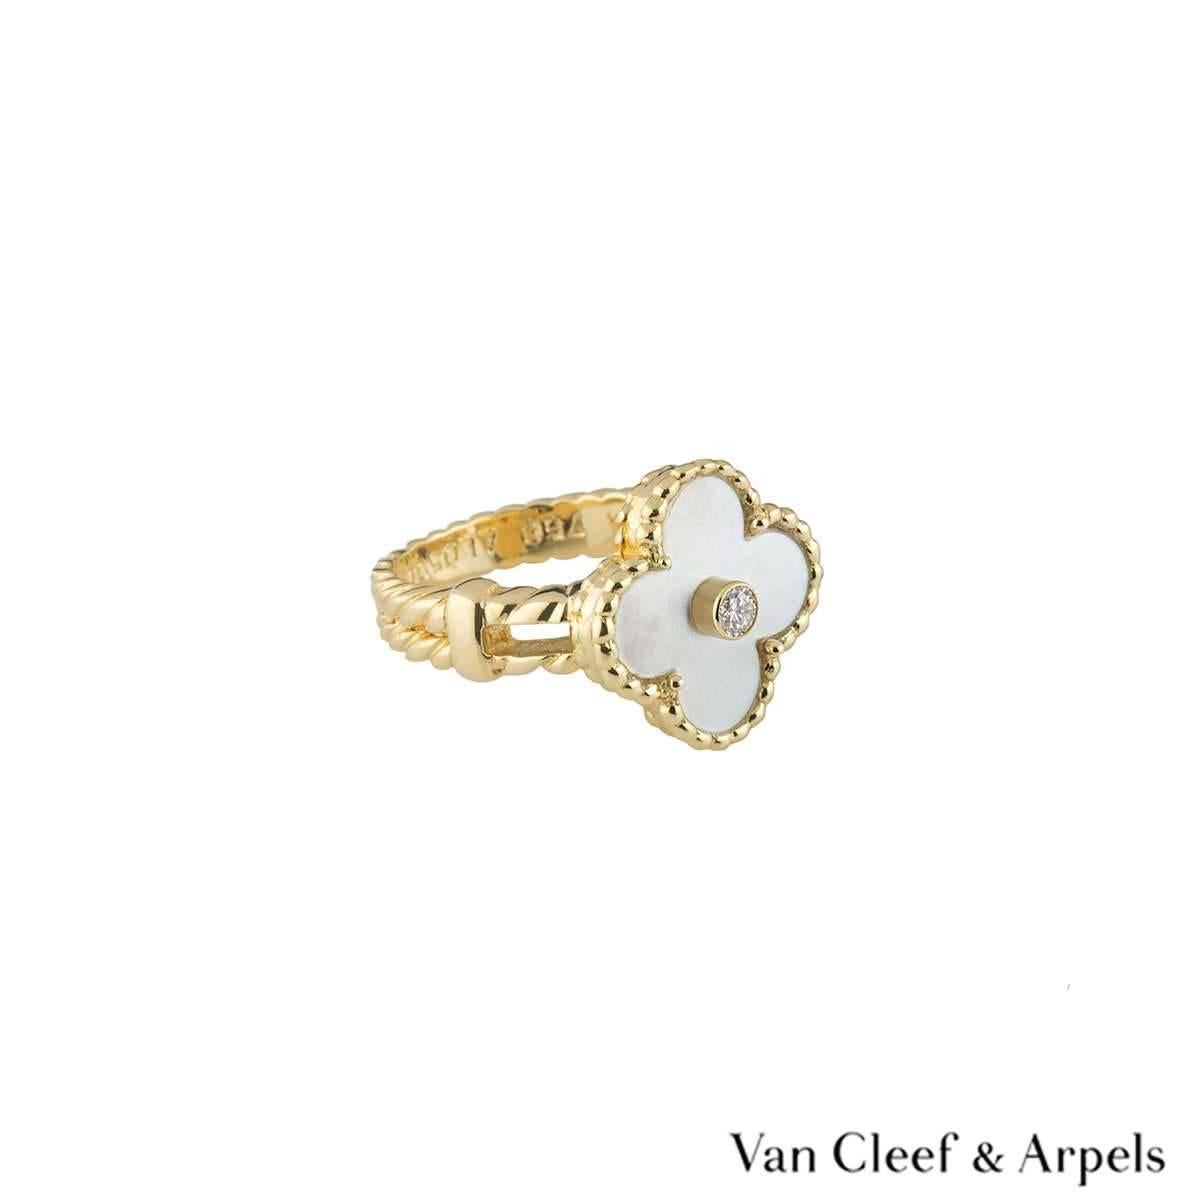 A beautiful 18k yellow gold Van Cleef & Arpels ring from the Alhambra collection. The ring is composed of a four leaf clover motif with a mother of pearl insert set to the centre, complimented by a beaded edge and a round brilliant cut diamond